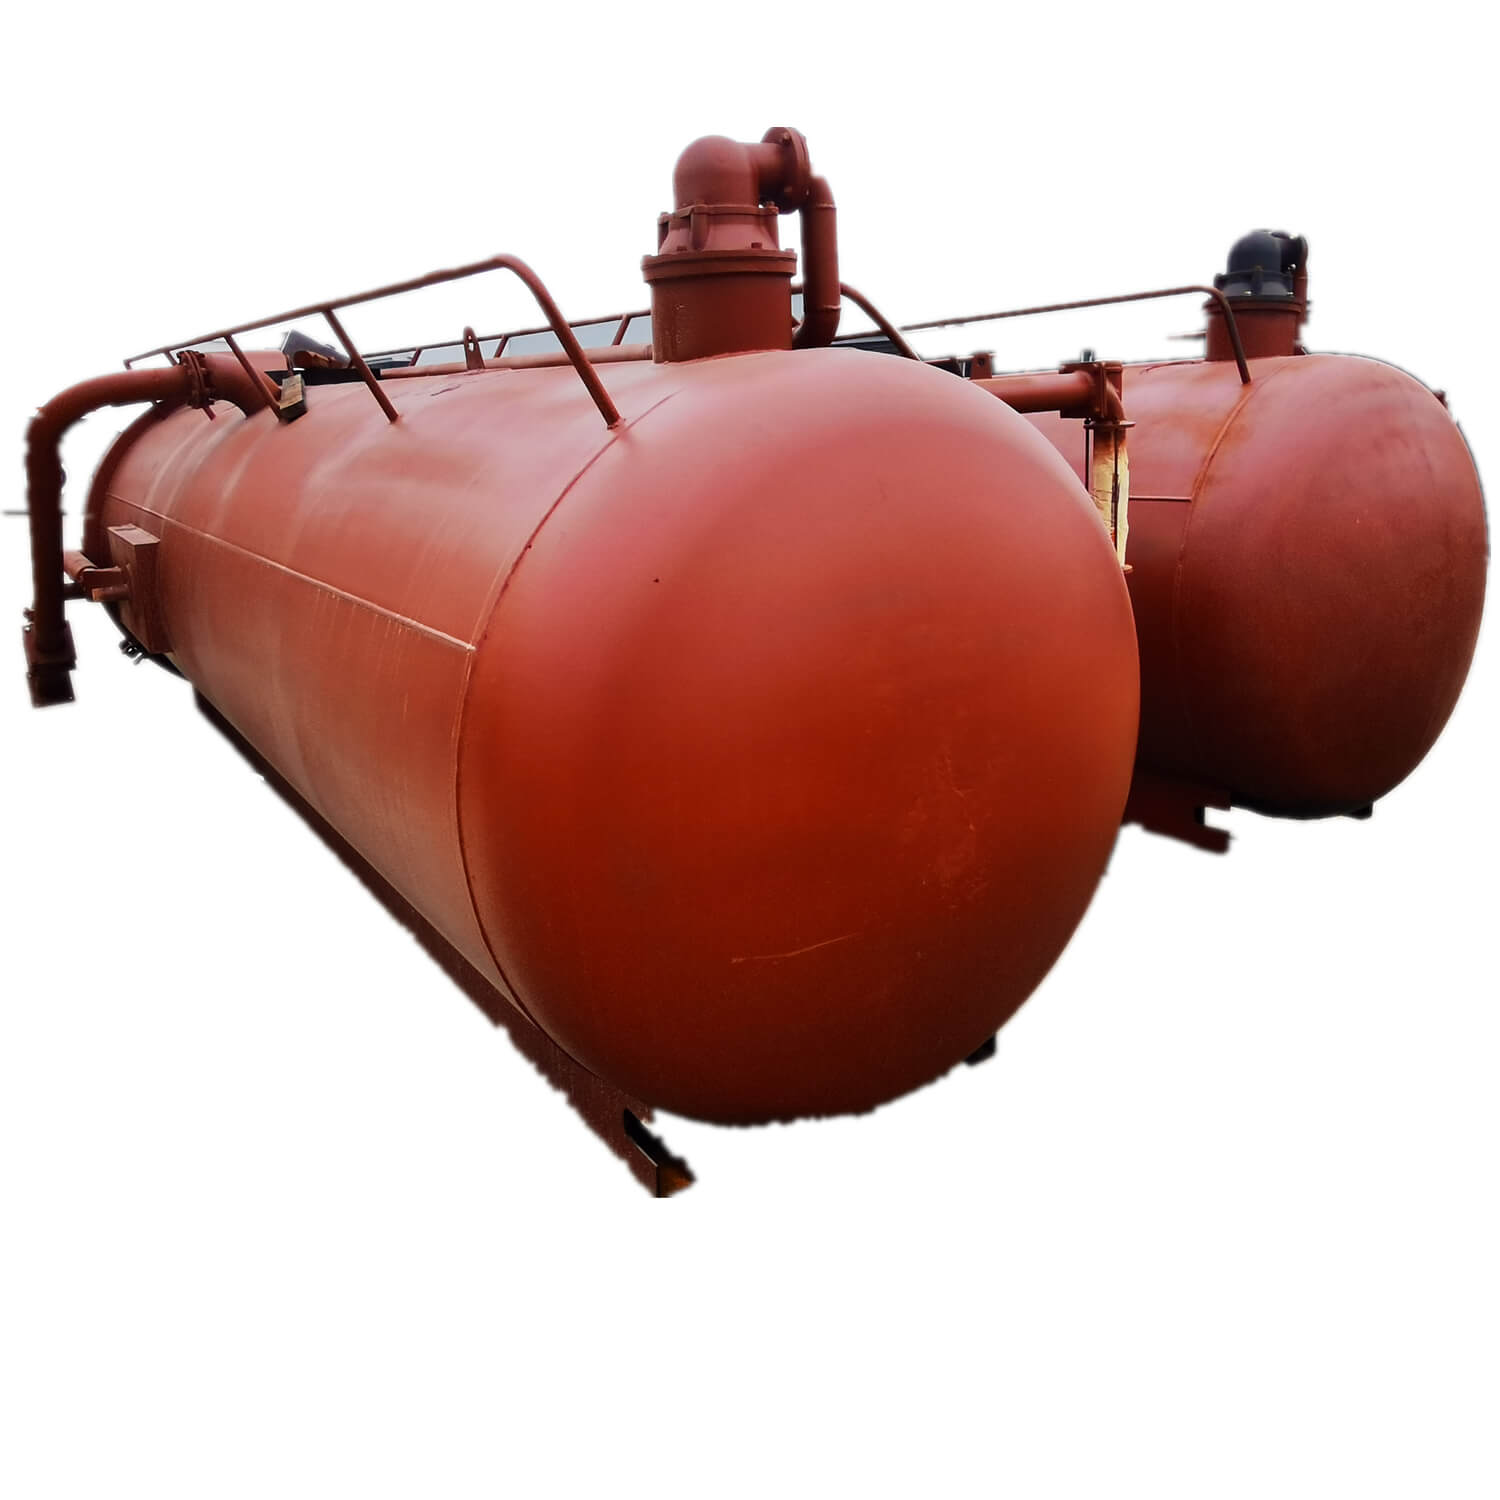 Customize Truck Mounted Tanks Cesspit Emptier Tank / Vacuum Truck Bodies Only For Sale Vacuum Tank Superstructure